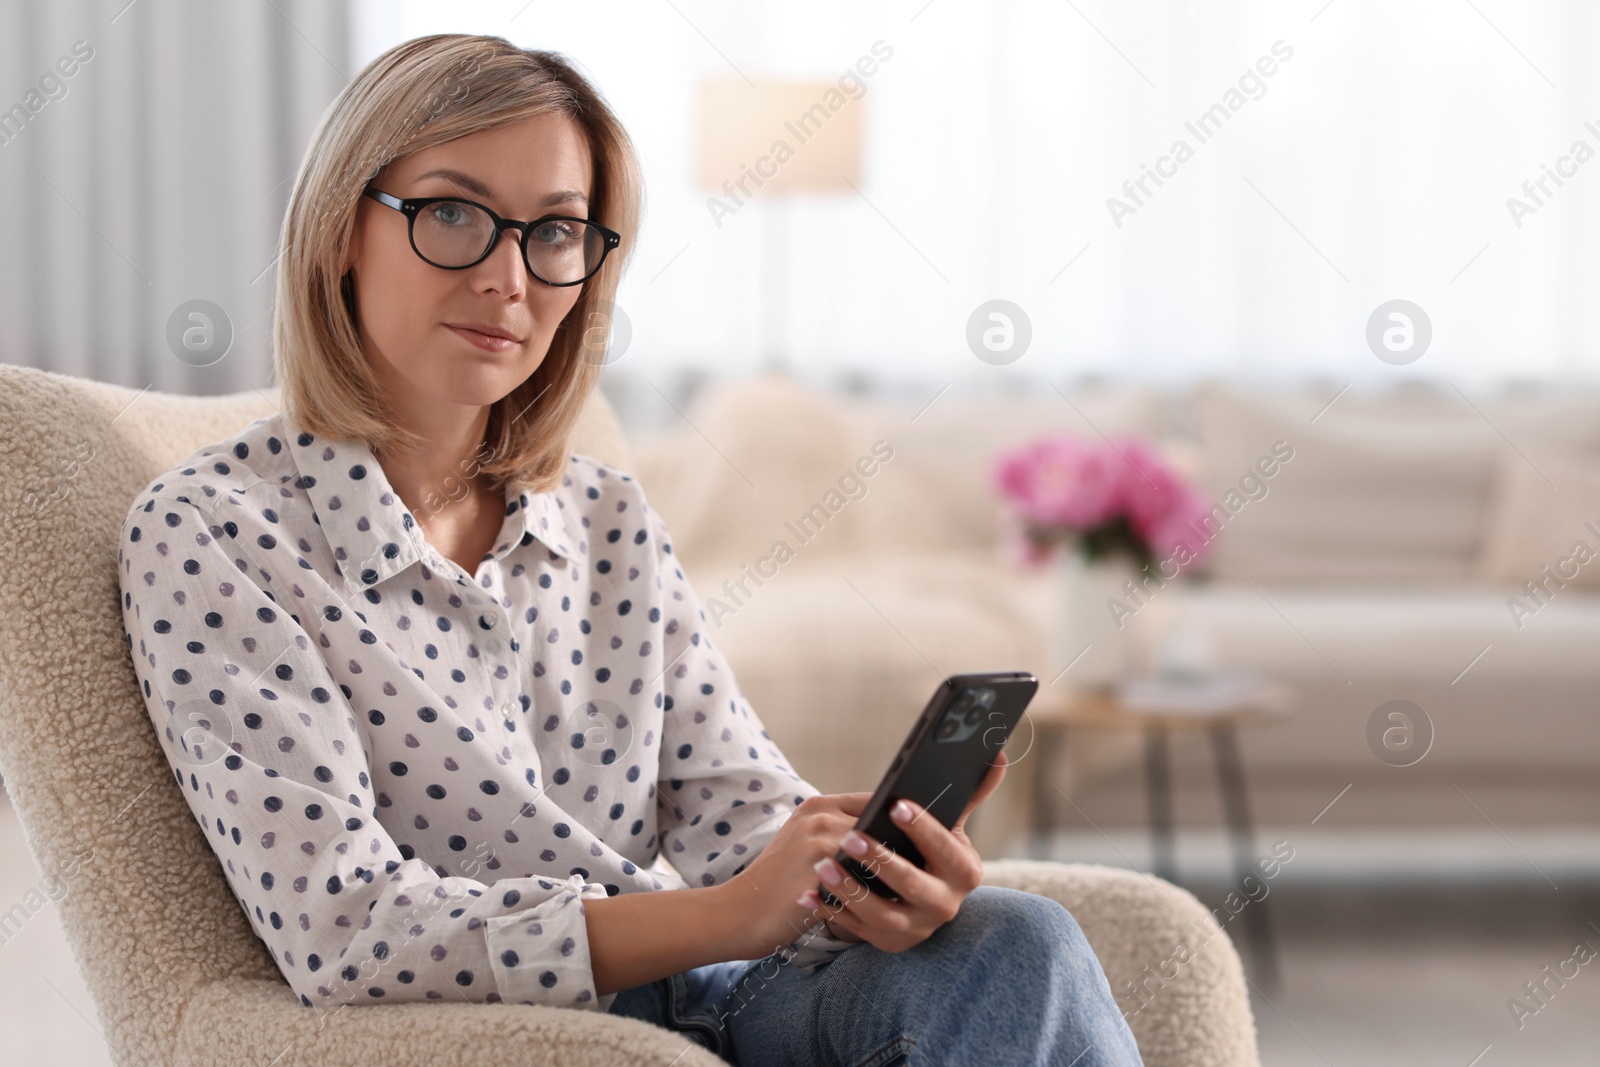 Photo of Woman with glasses using mobile phone at home, space for text